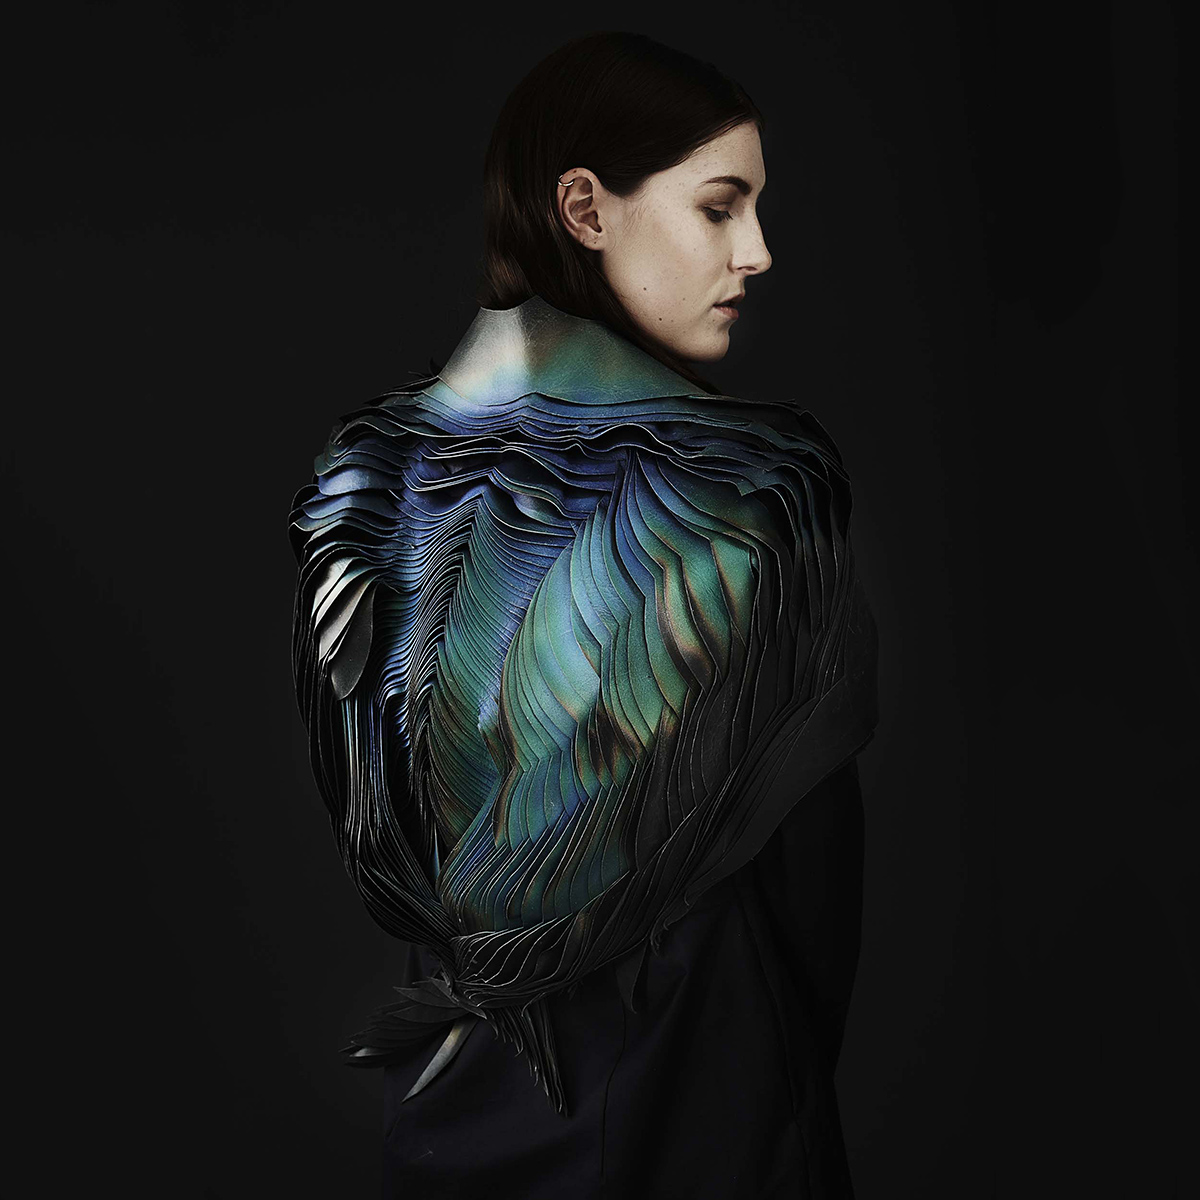 "Air" Cape The Unseen Lauren Bowker (English, born 1985) British, 2014 Coated leather * THE UNSEEN 2015 AIR Collection. *Courtesy, Museum of Fine Arts, Boston